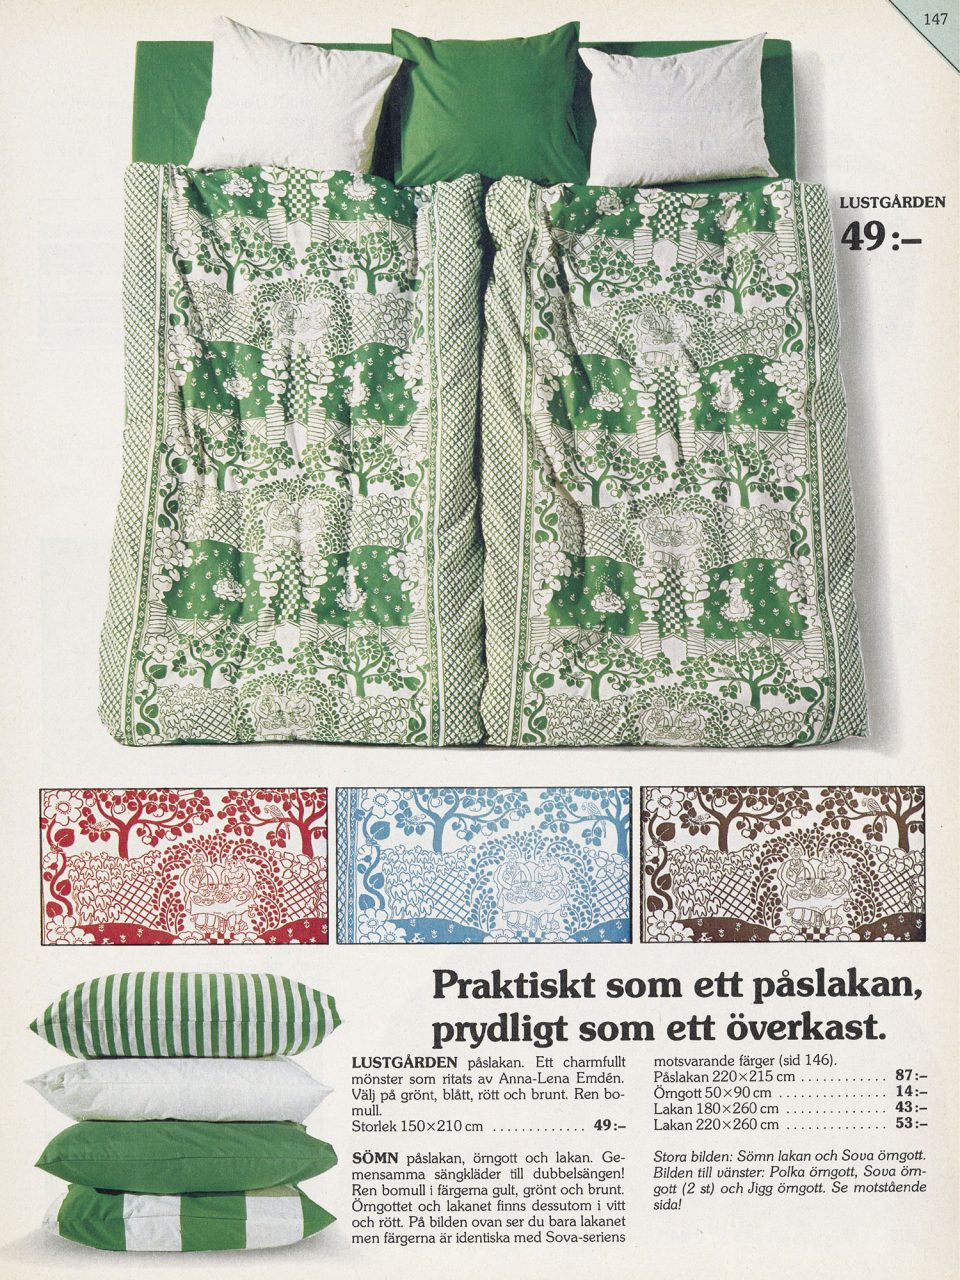 1978 IKEA catalogue page featuring LUSTGÅRDEN duvet covers in green, brown, red, and blue.